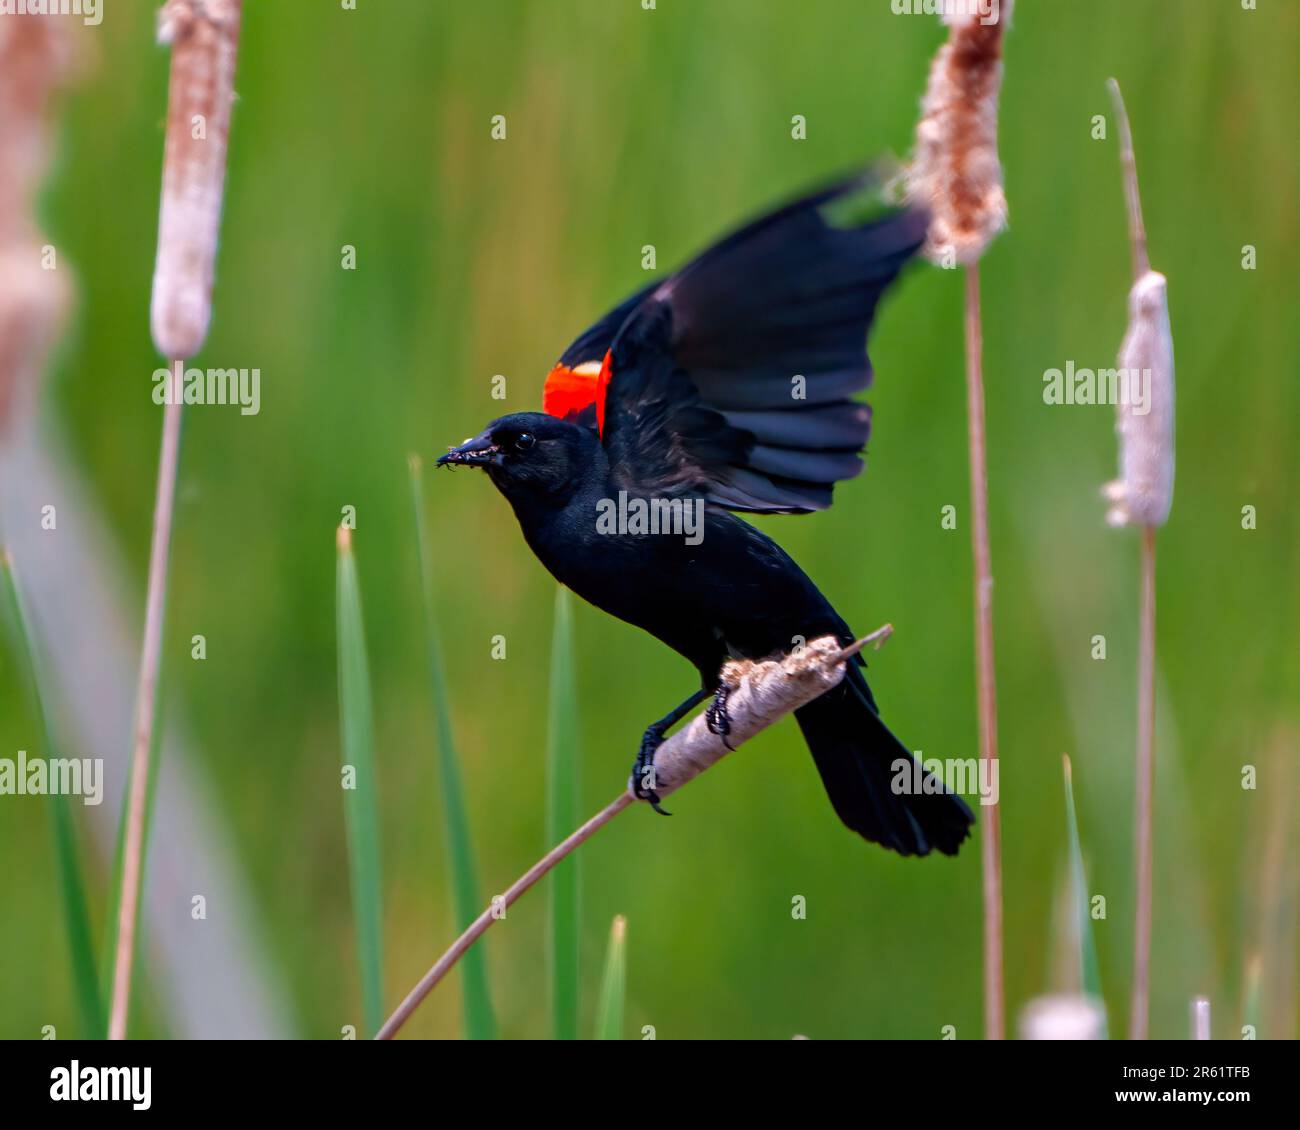 Red-Winged Blackbird flying from a cattail with spread wings and an insect in its beak with a green background in its environment and habitat. Stock Photo